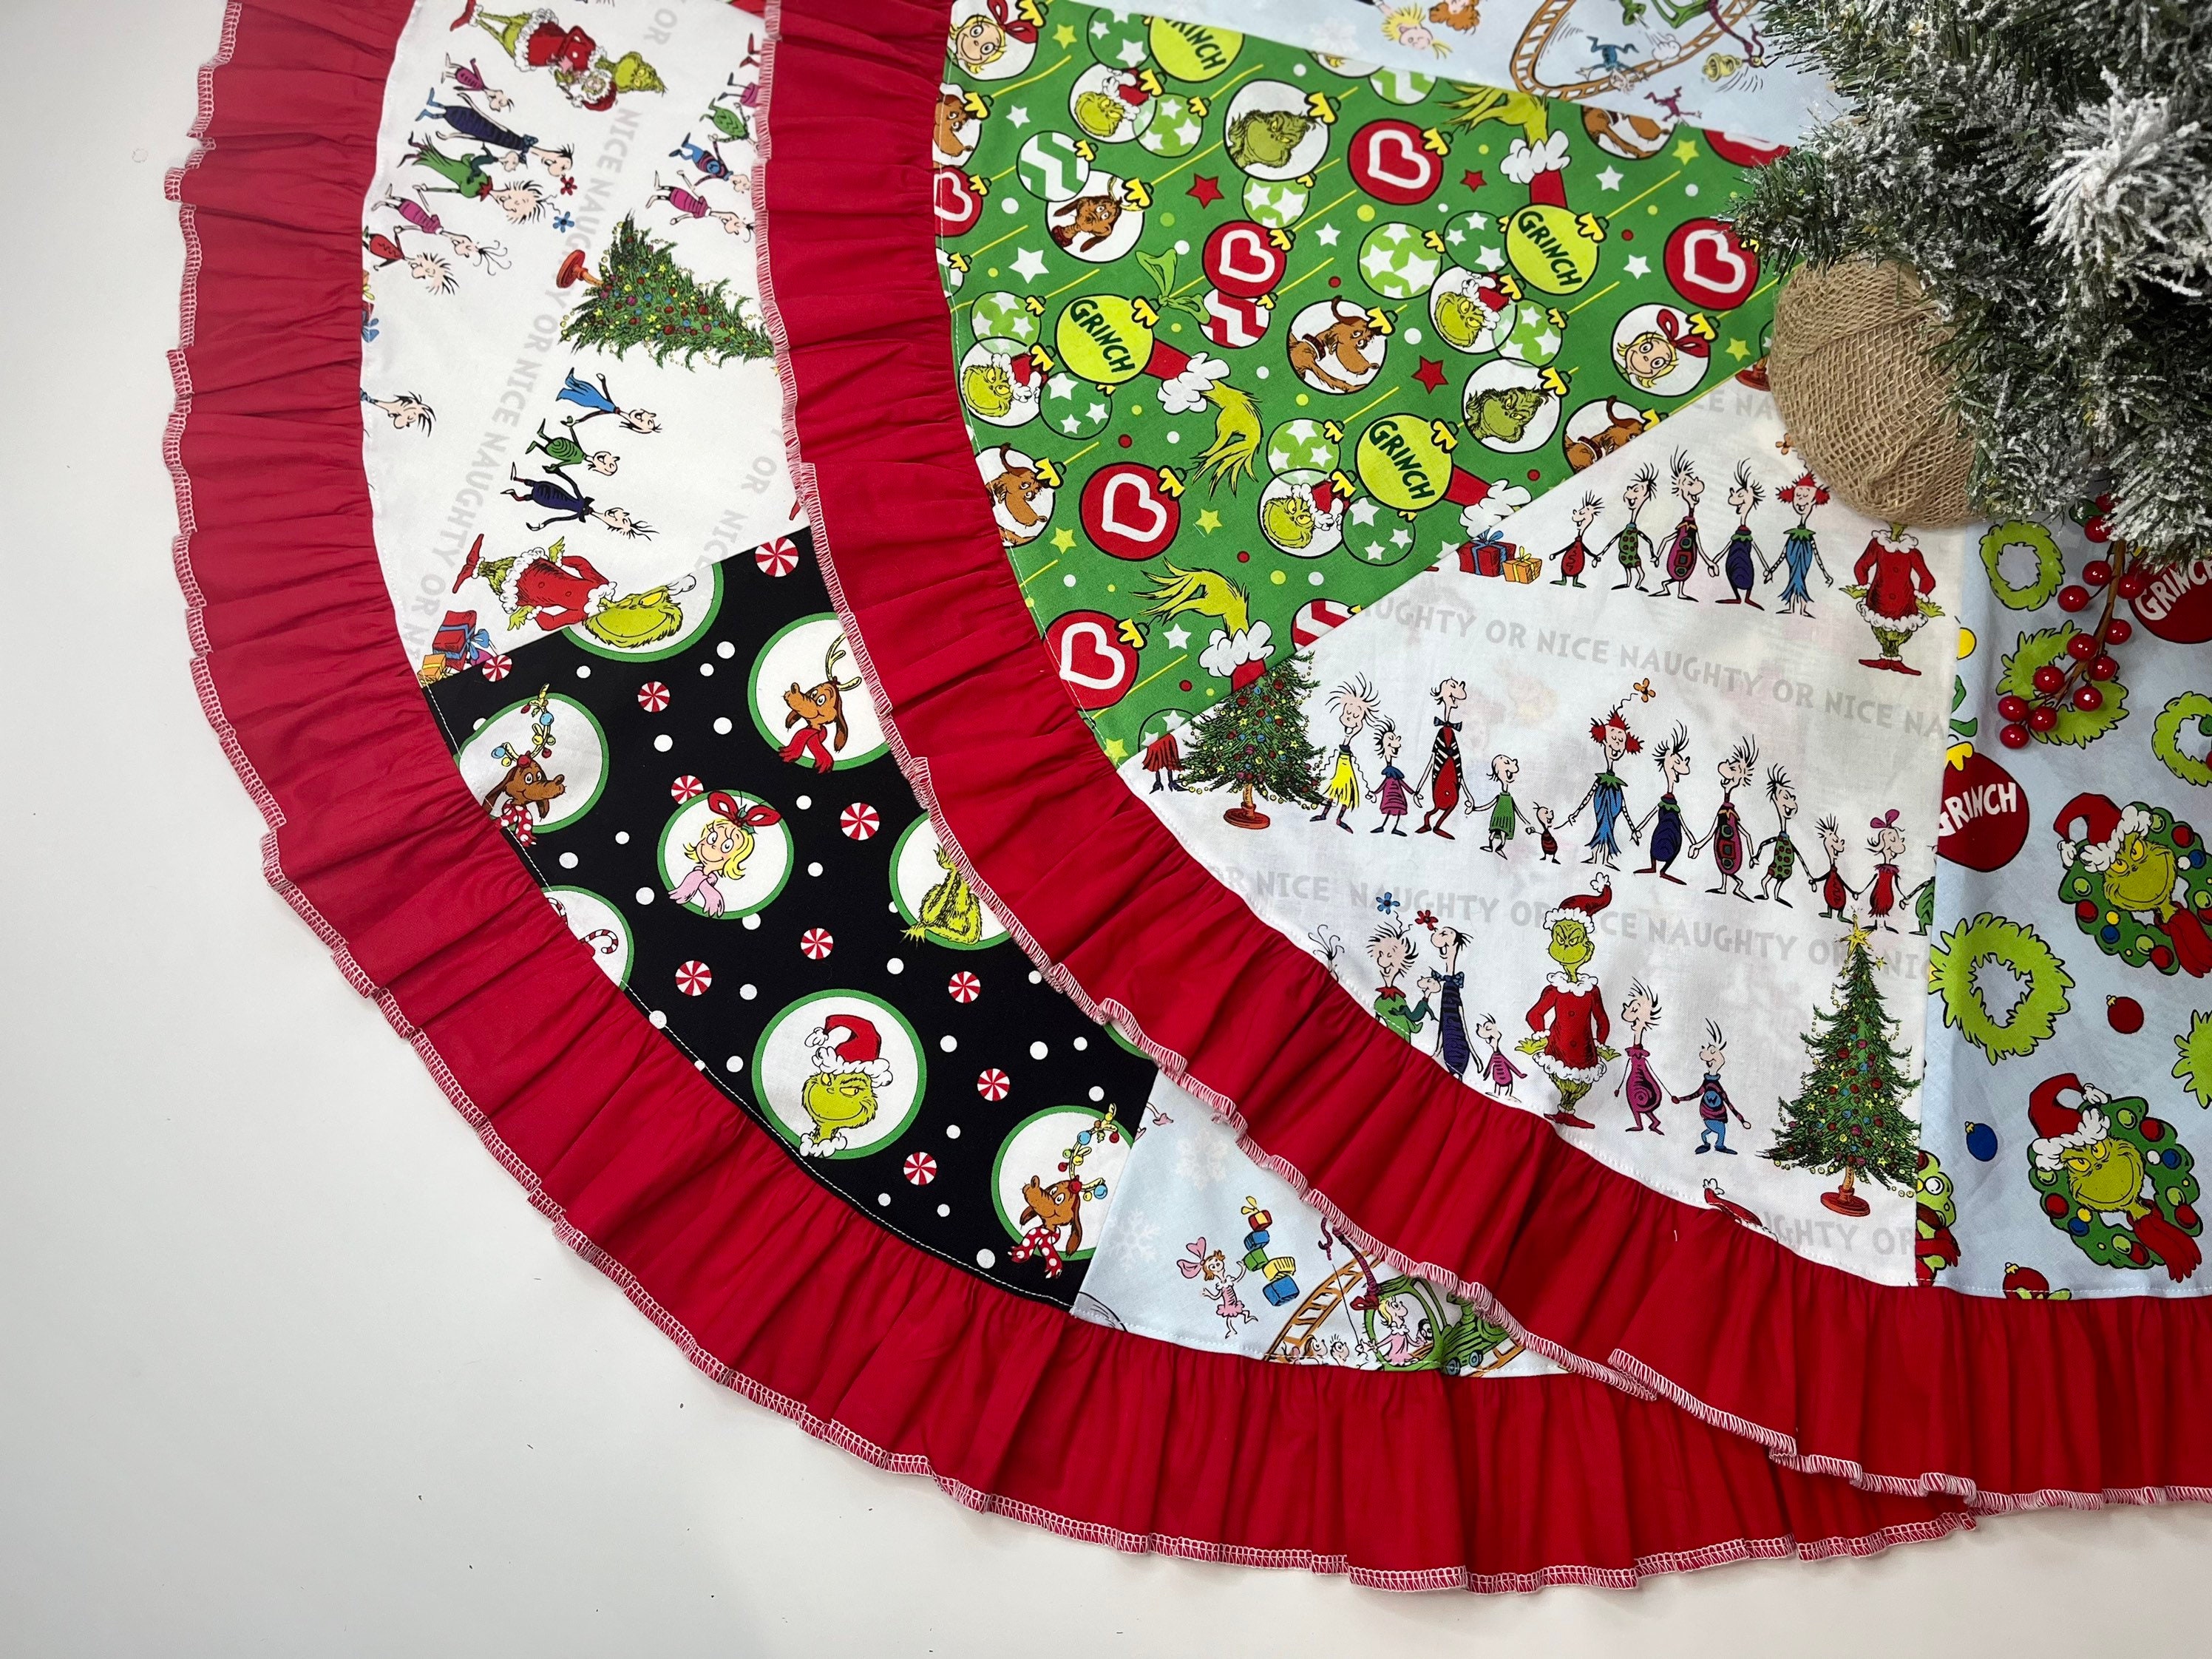 Grinch Christmas Fabric Dr. Seuss / Whoville Max the Grinch / Sewing  Quilting / DIY Craft Face Mask Fabric 